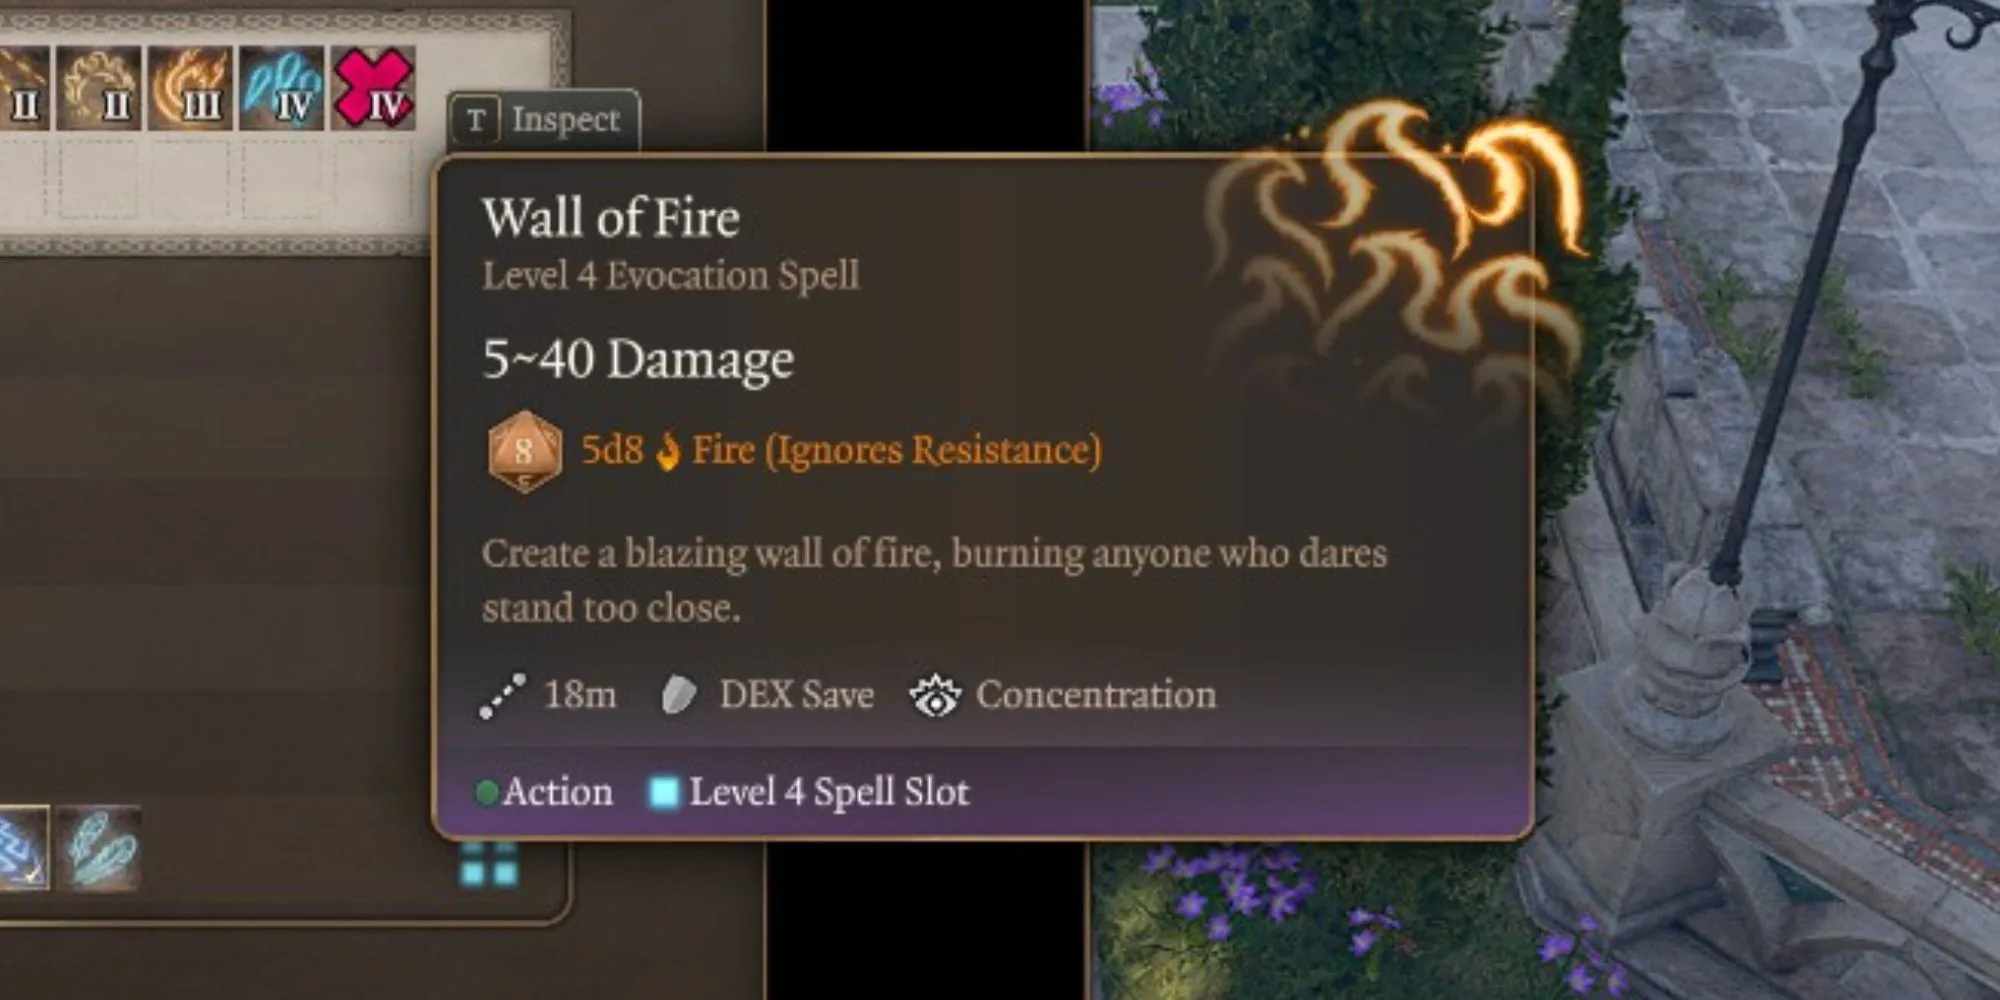 The Wall of Fire spell in Baldur’s Gate 3